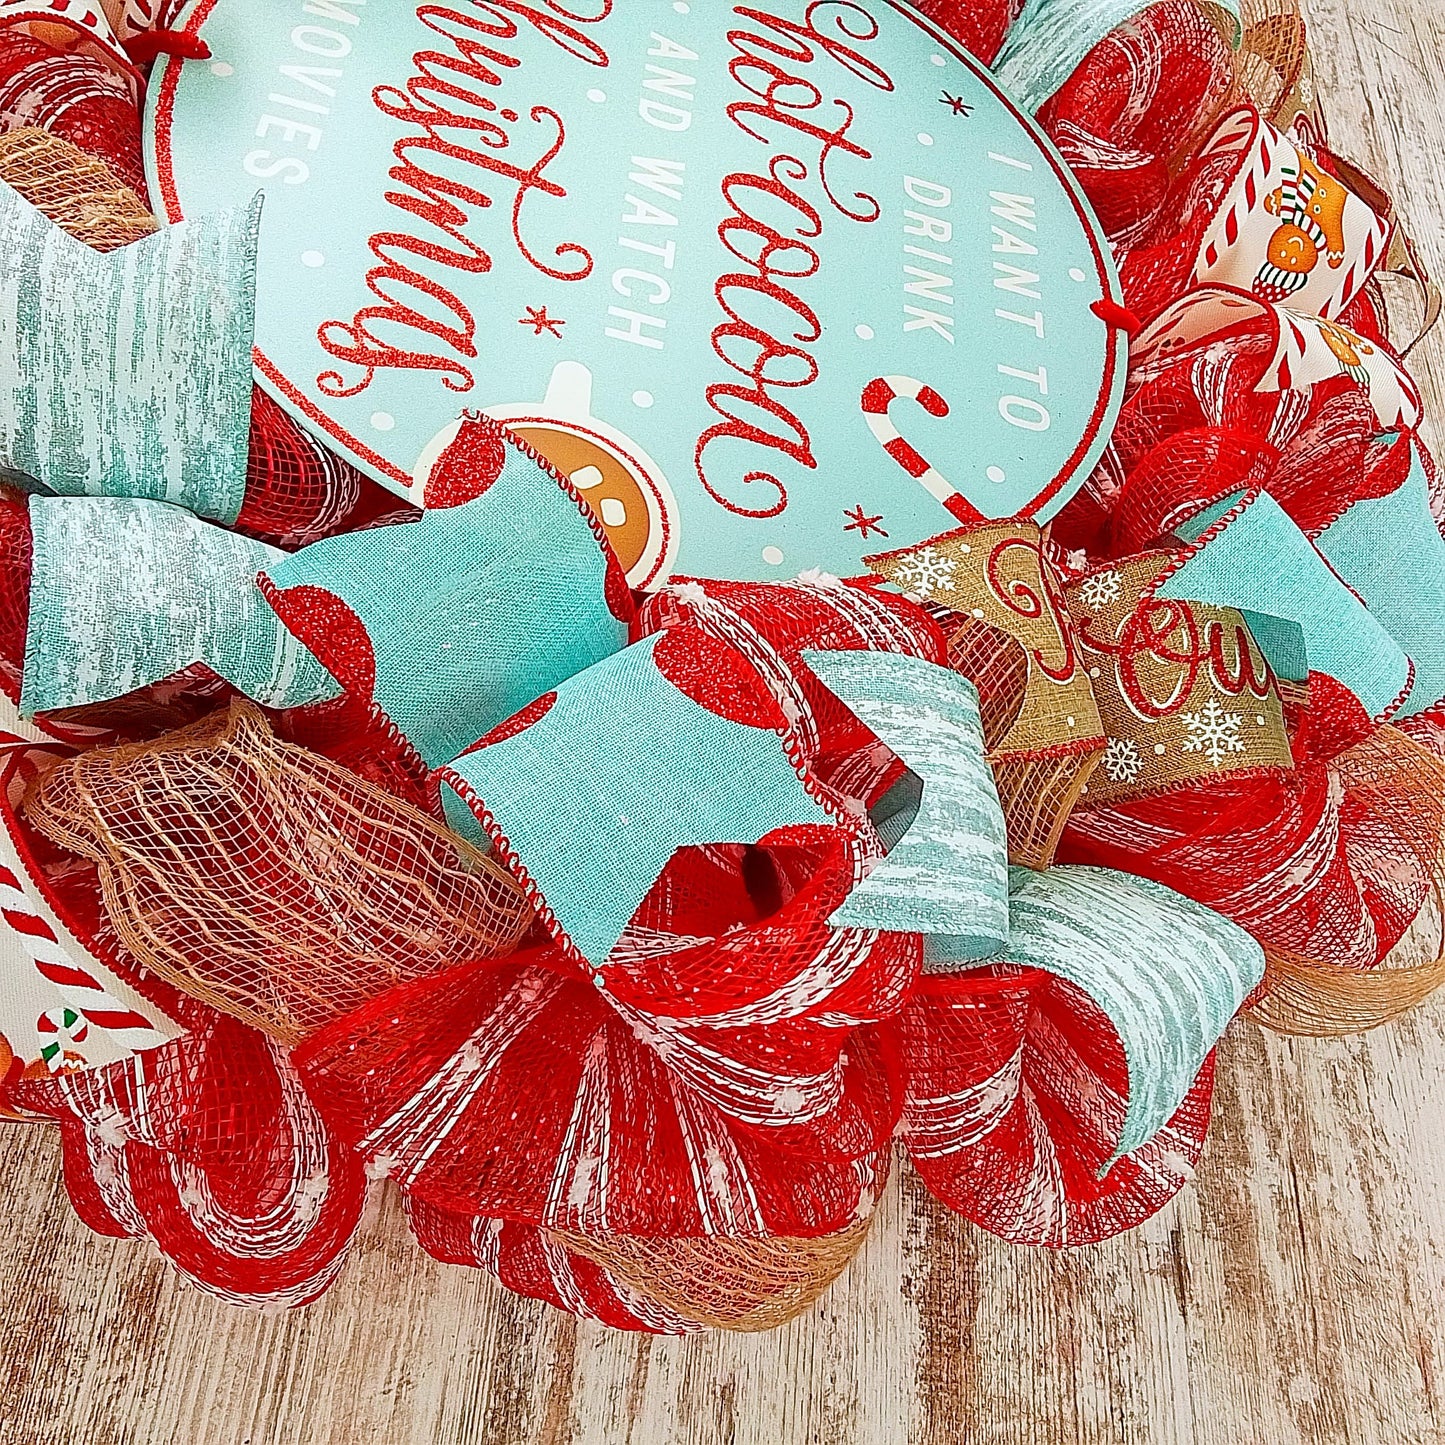 Christmas Cookies Gingerbread Wreath - Outdoor Holiday Wreath - Mesh Front Door Wreath - Turquoise Red Brown White Green